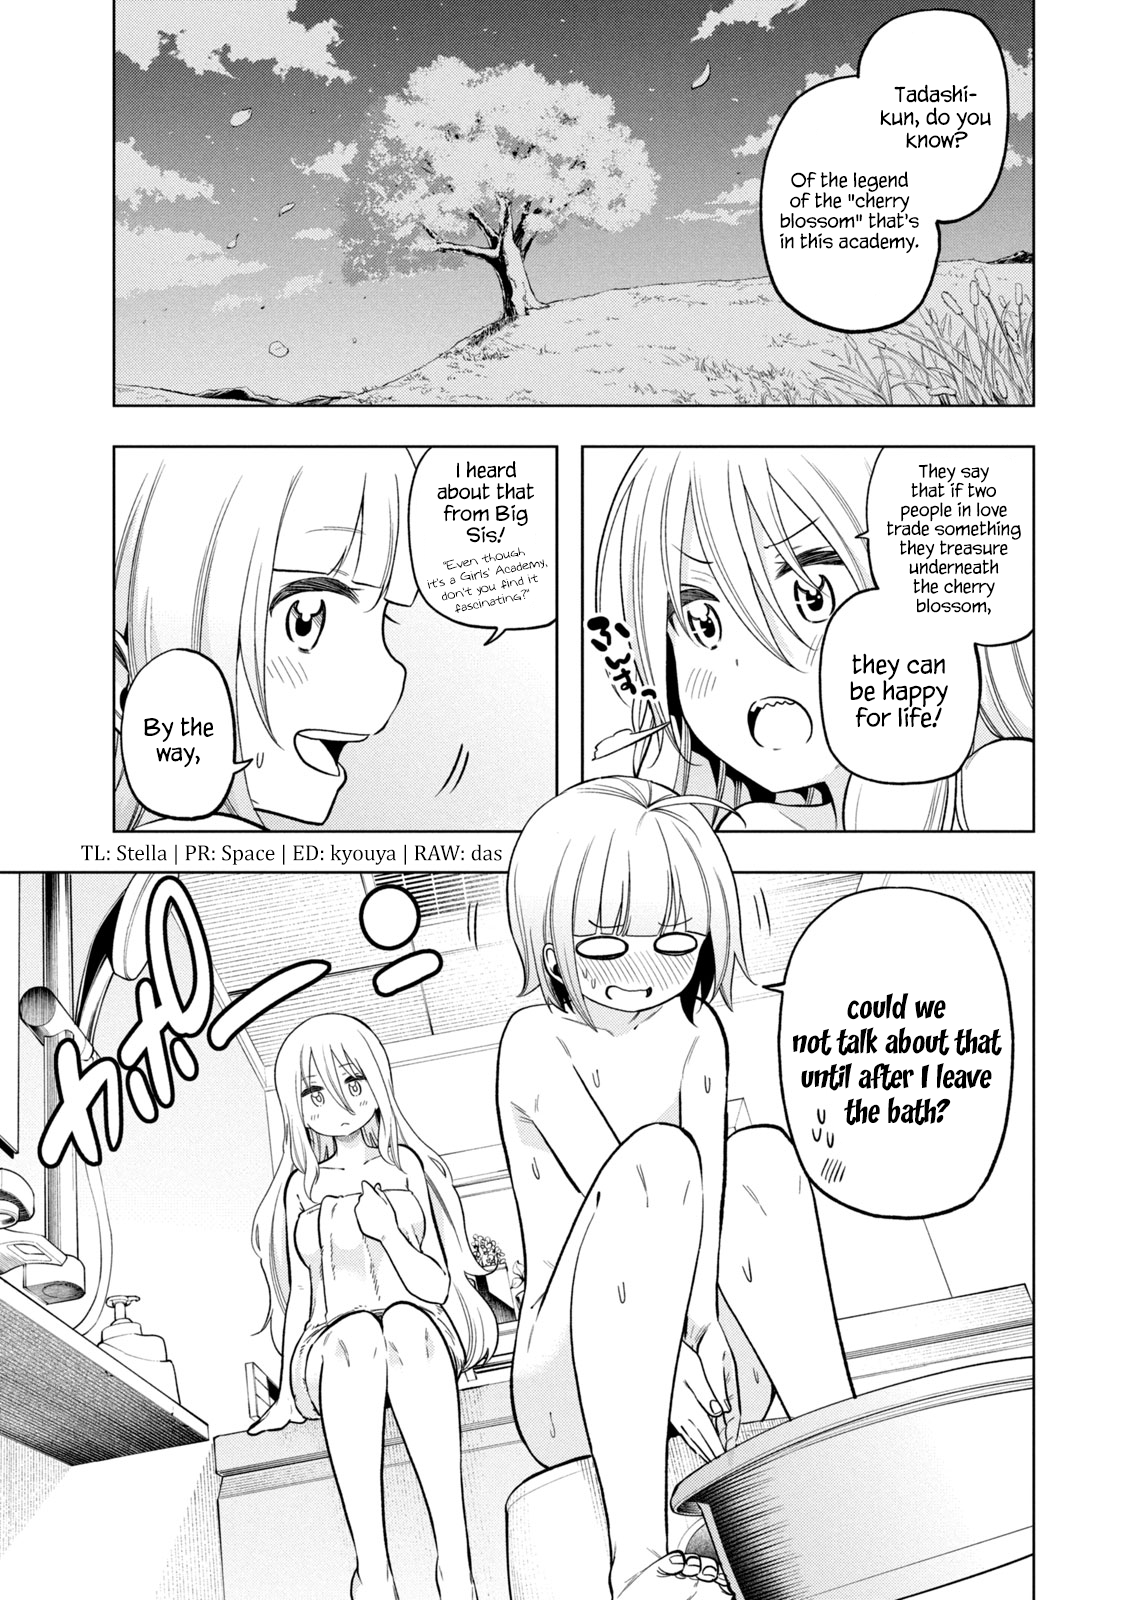 Why Are You Here Sensei!? Vol.9 Chapter 87